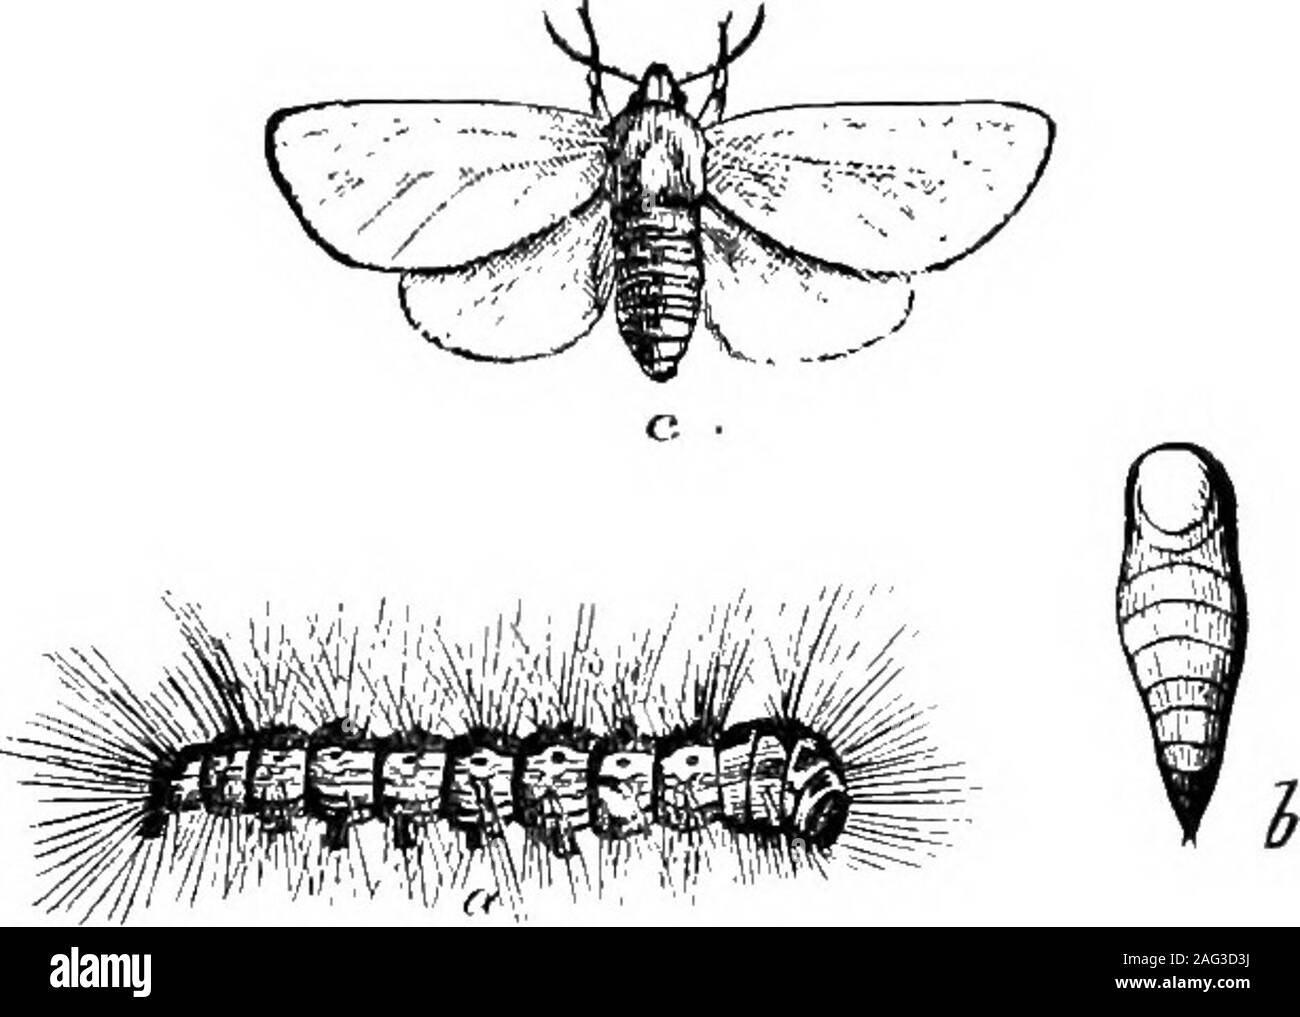 . [Scientific lectures]. FOEEST TENT CATERPILLAE—CLISIOCAMPASYLYATICA.—iTanFig. 4. Caterpillar full grown ; natural size,a, eggs; b, female moth, natural size; c, enlarged viewof egg from top ; d, enlarged view of eggs from side. See page 21.. WEB WORM—HYPHANTRIA TEXTOR.—^«rns.All natural size, a, caterpillar ; b, chrysalis ; c, moth. See page 22. Fig. 1. Stock Photo